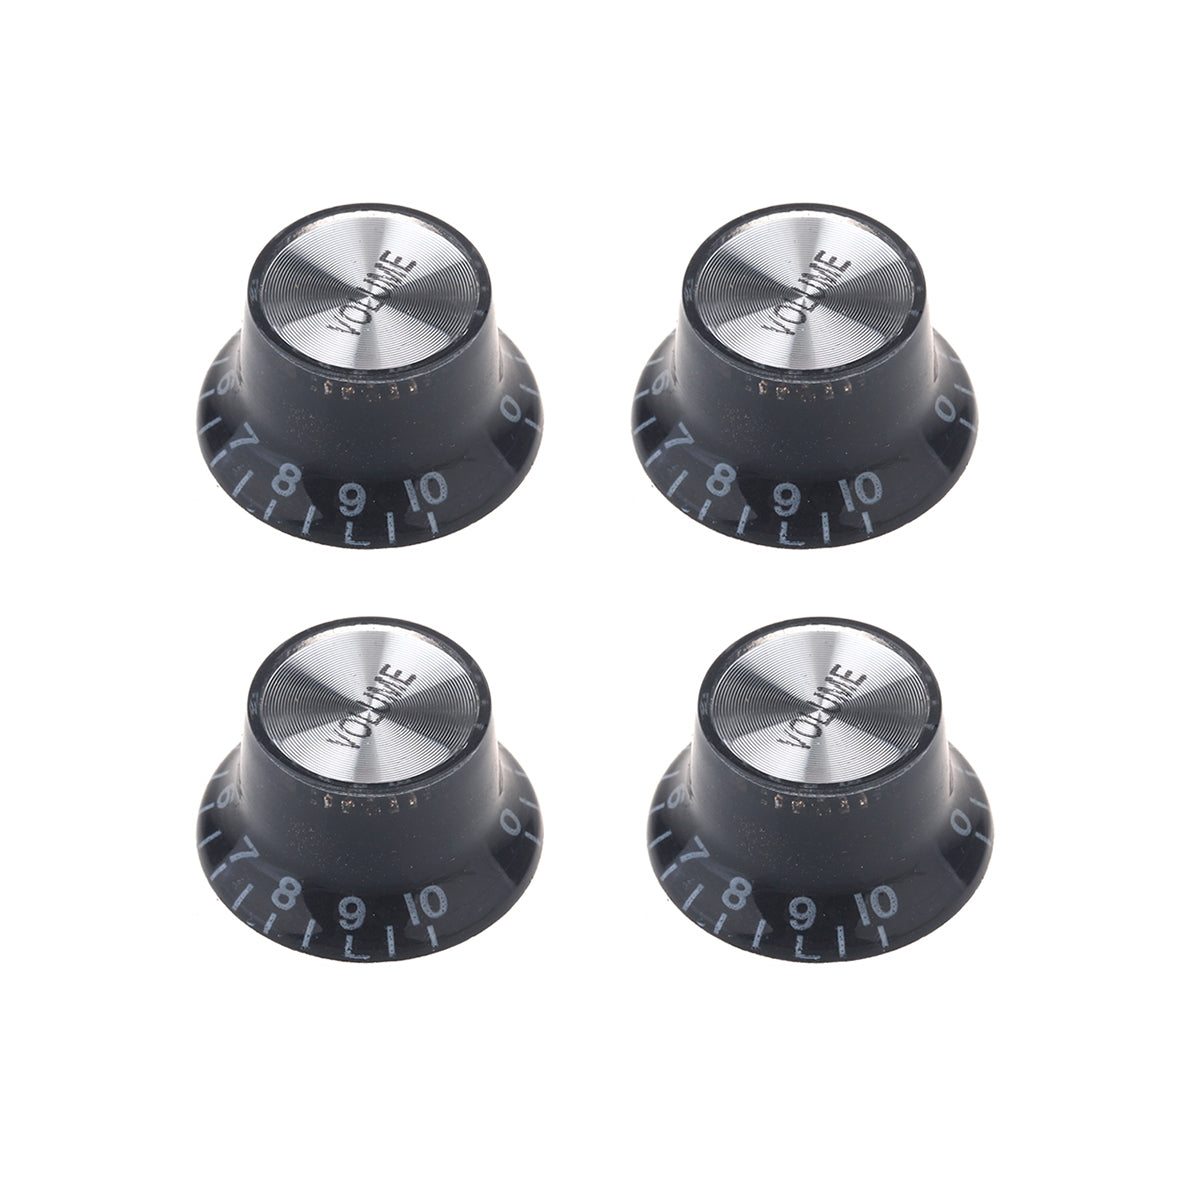 Musiclily Metric 6mm LP Style Guitar Speed Volume Control Knobs,Black ( 4 Pieces)